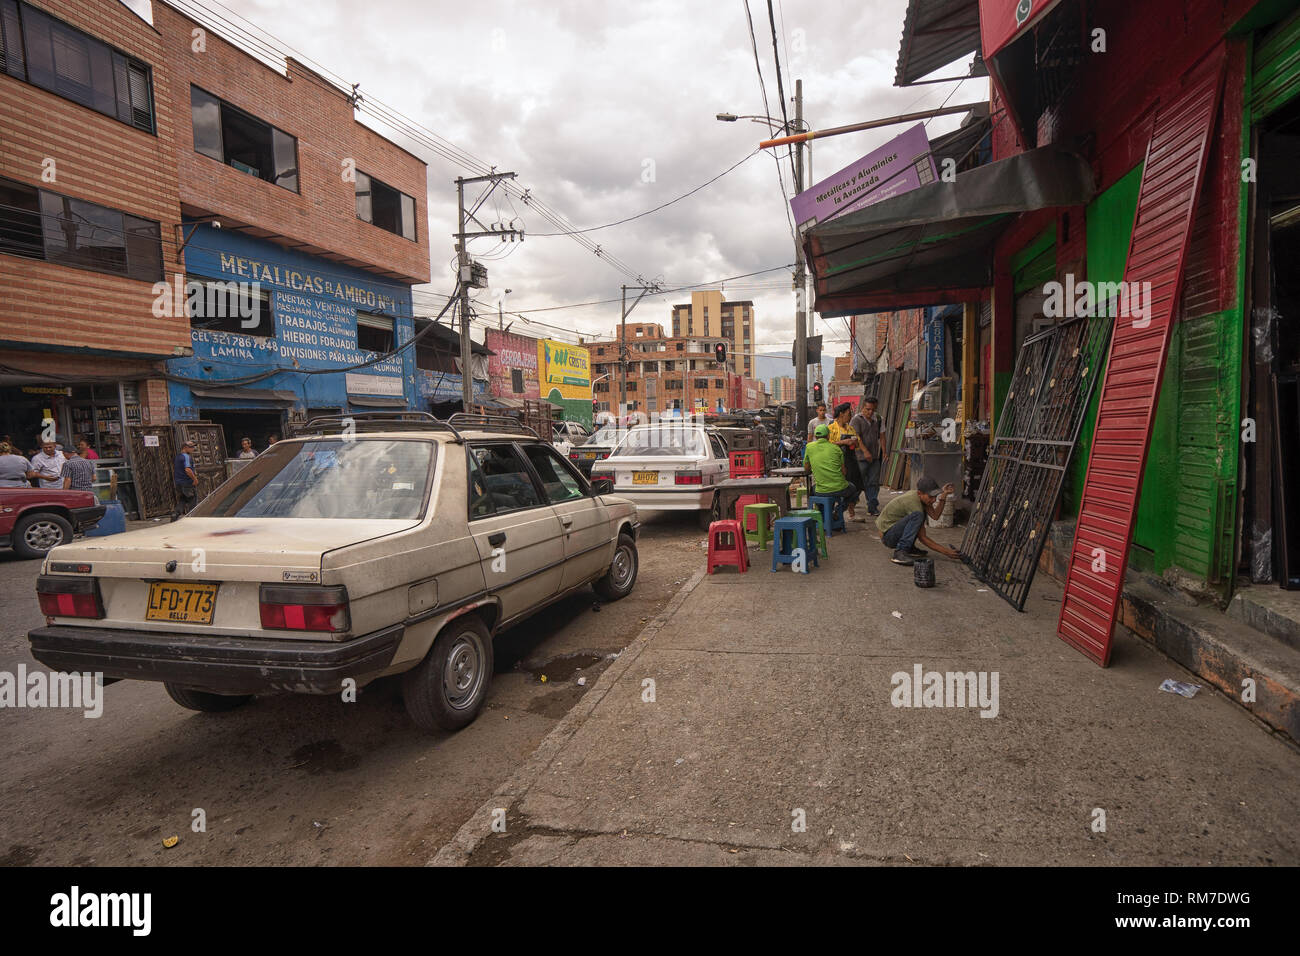 Medellin, Colombia - July 26, 2018: cars parked in front of a welding shop Stock Photo